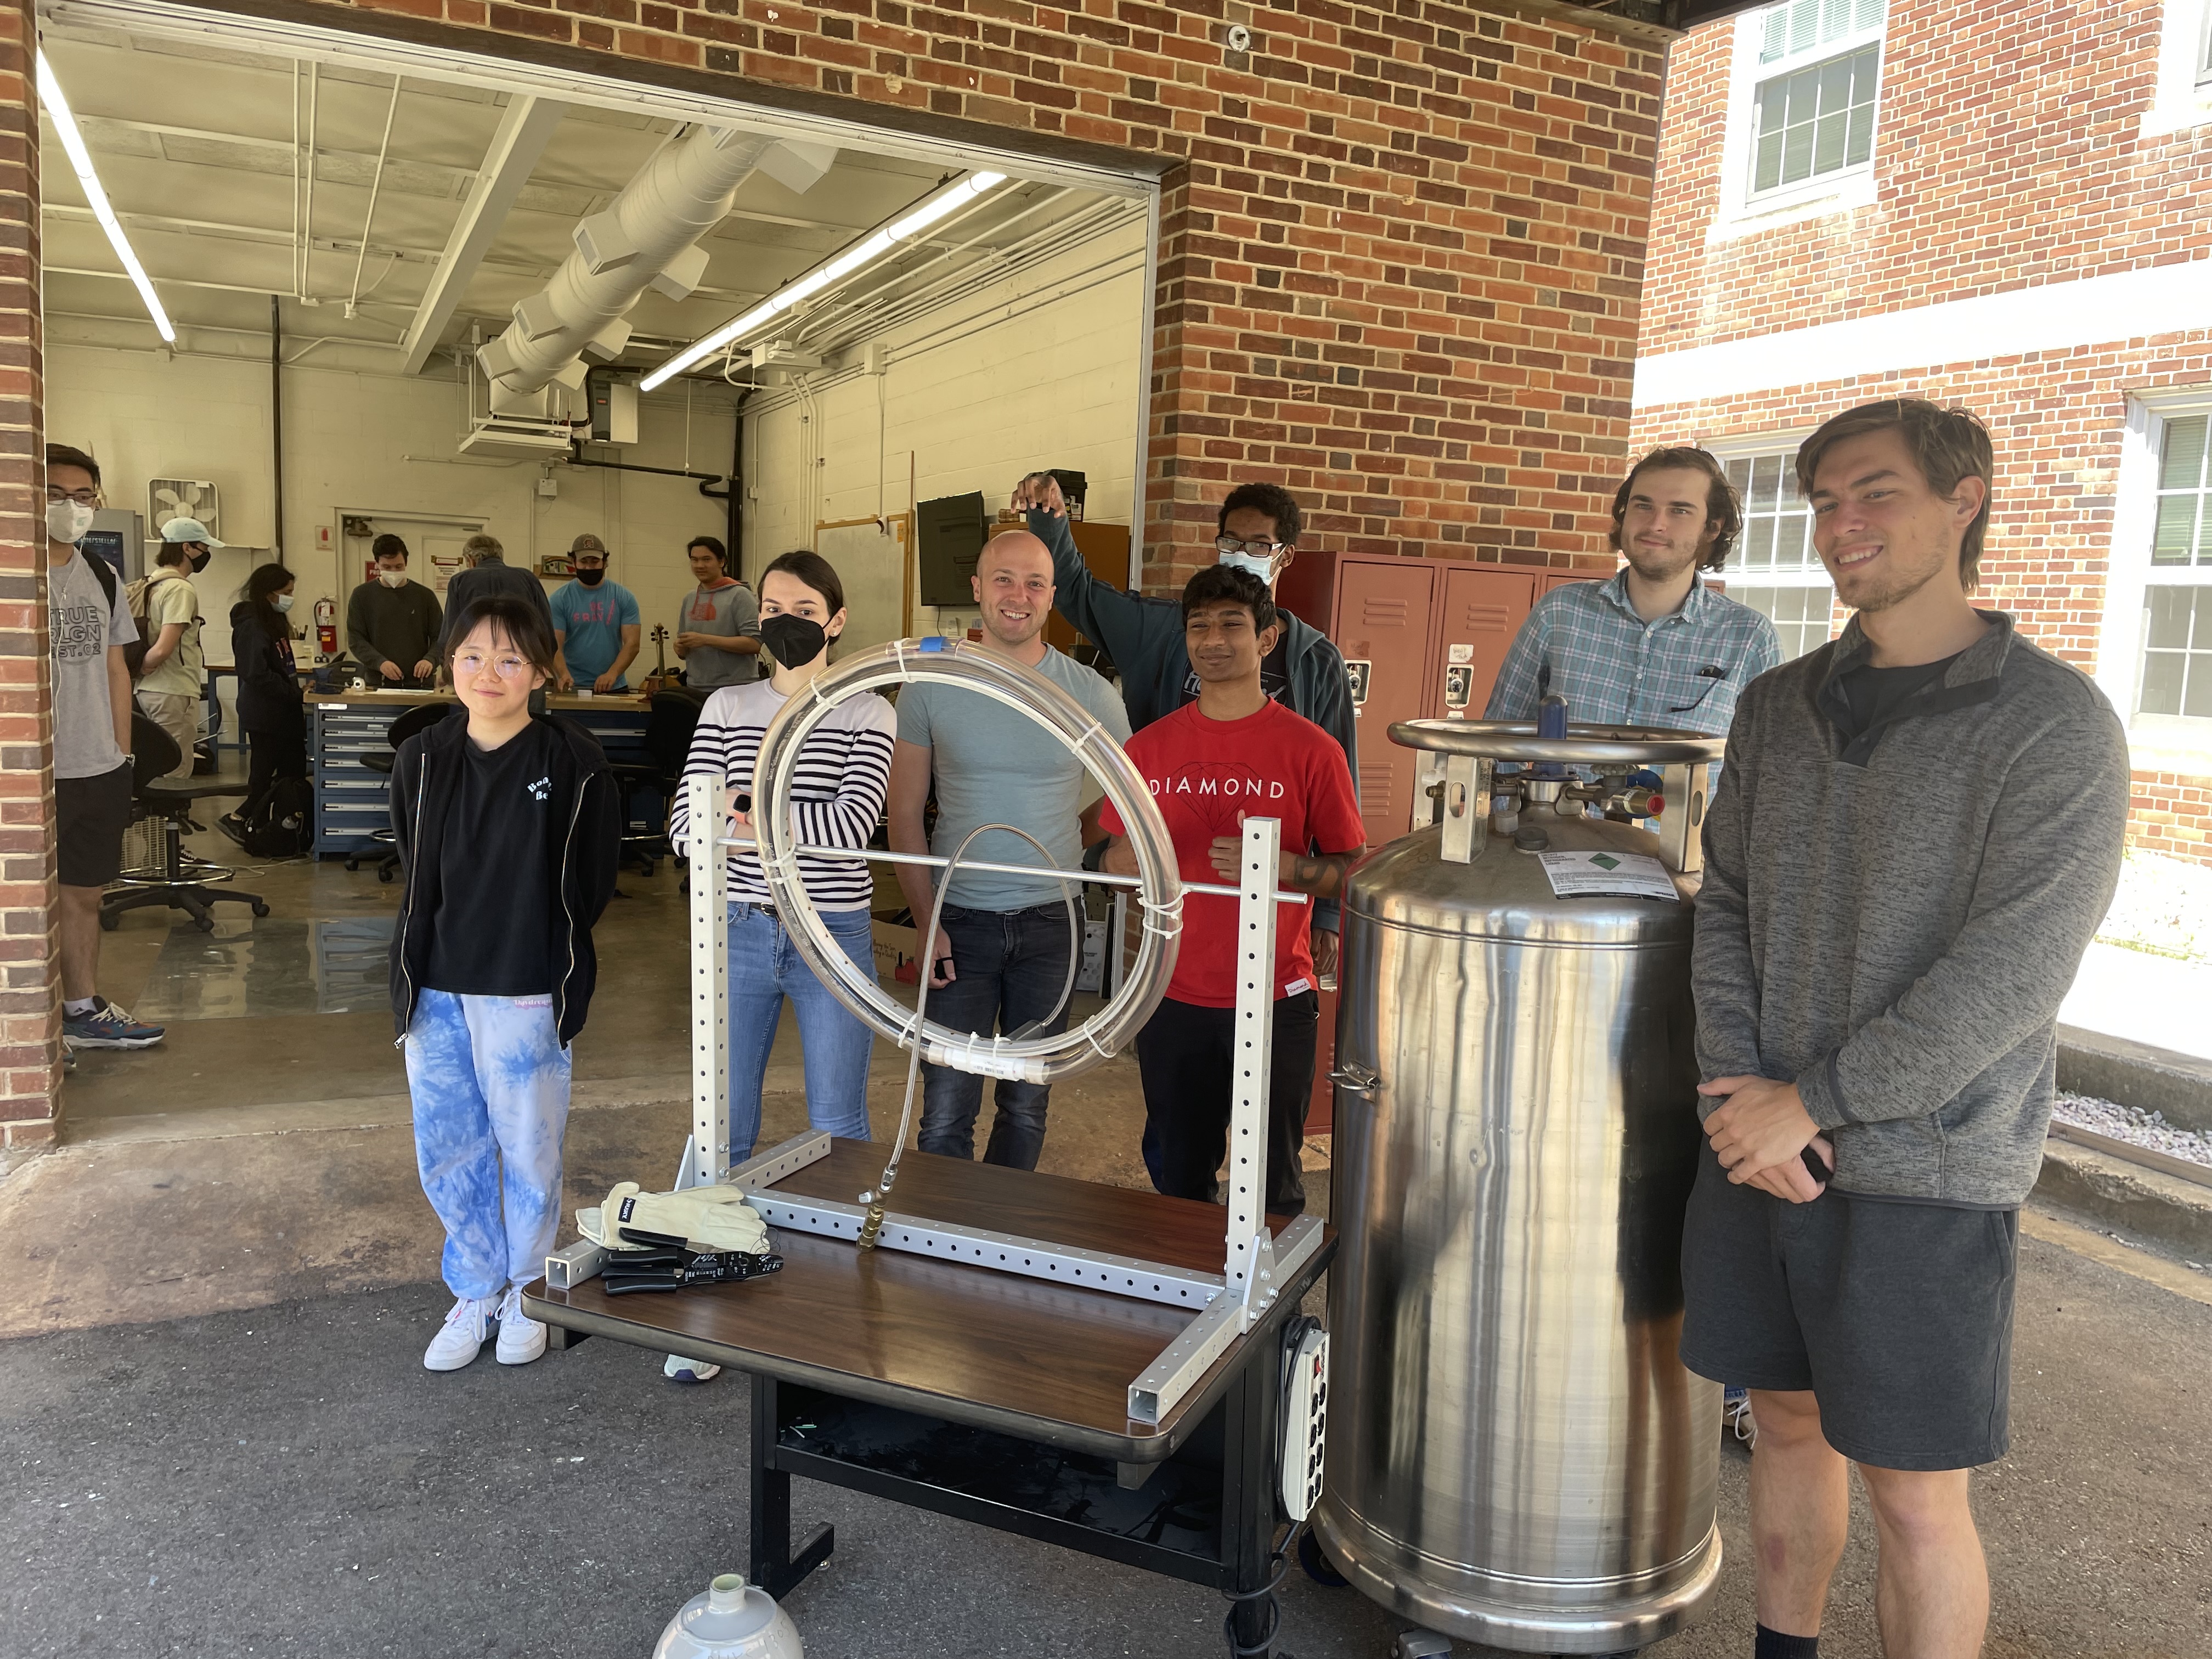 PHYS 499X students demonstrate their Spring 2022 semester project, a liquid nitrogen-cooled superconducting loop. From left to right: Peiyu Qin, Alexandra Pick-Aluas, Meyer Taffel, Noah Doney, Ankith Rajashekar, Brian Robbins, and Dylan Christopherson. Image courtesy of Daniel Lathrop.